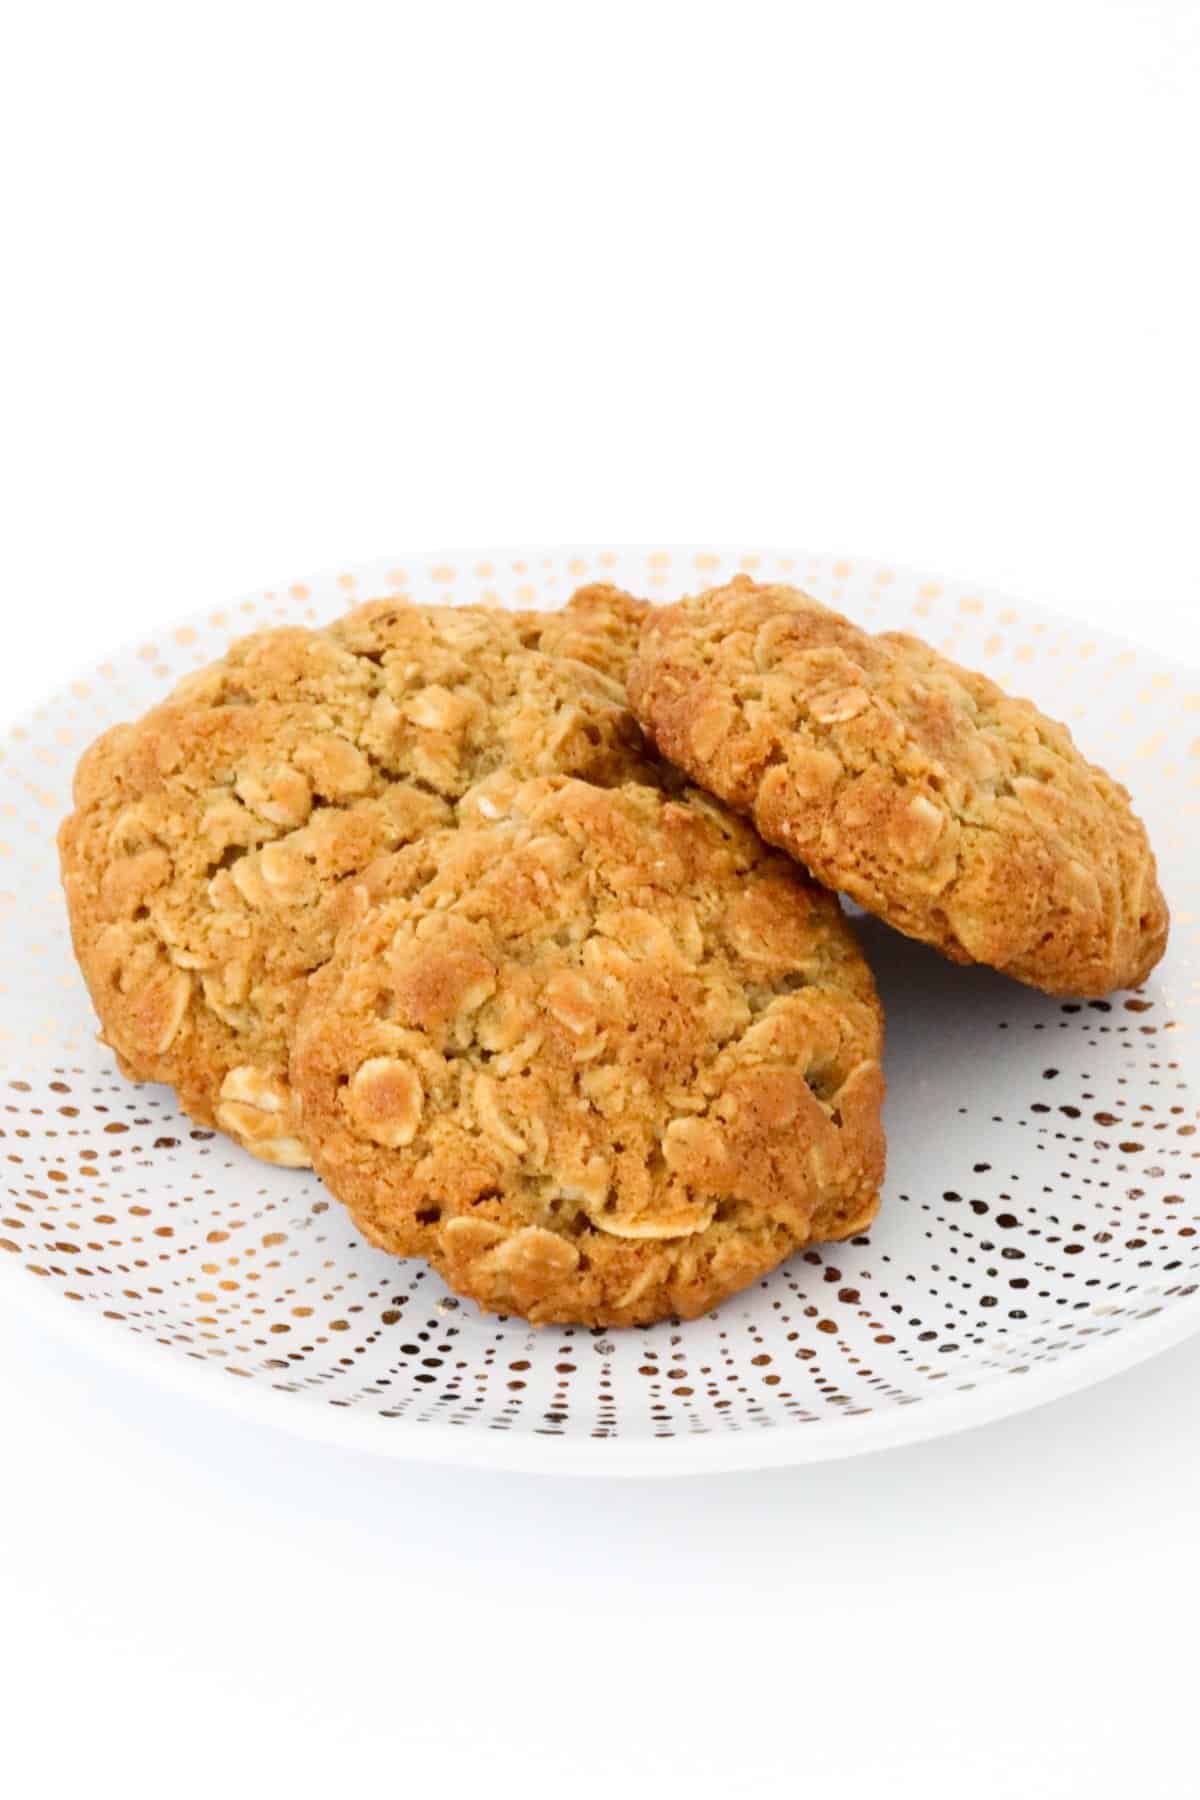 Three golden syrup and oat biscuits on a plate.